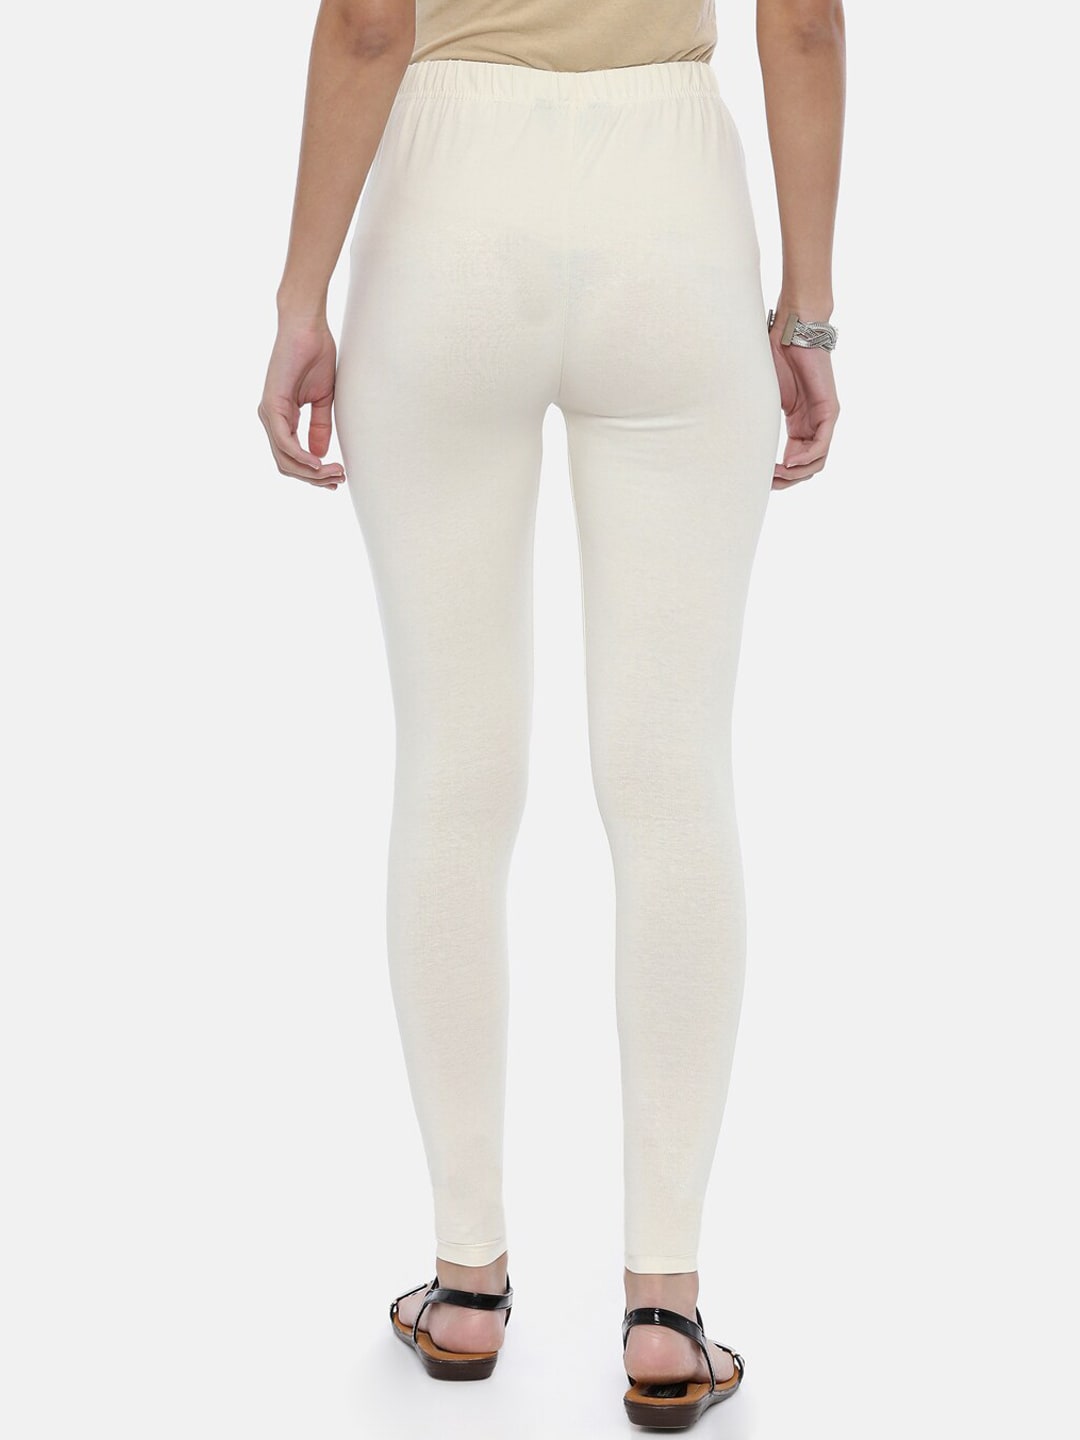 Souchii Cream-Coloured Solid Ankle-Length Leggings - Distacart